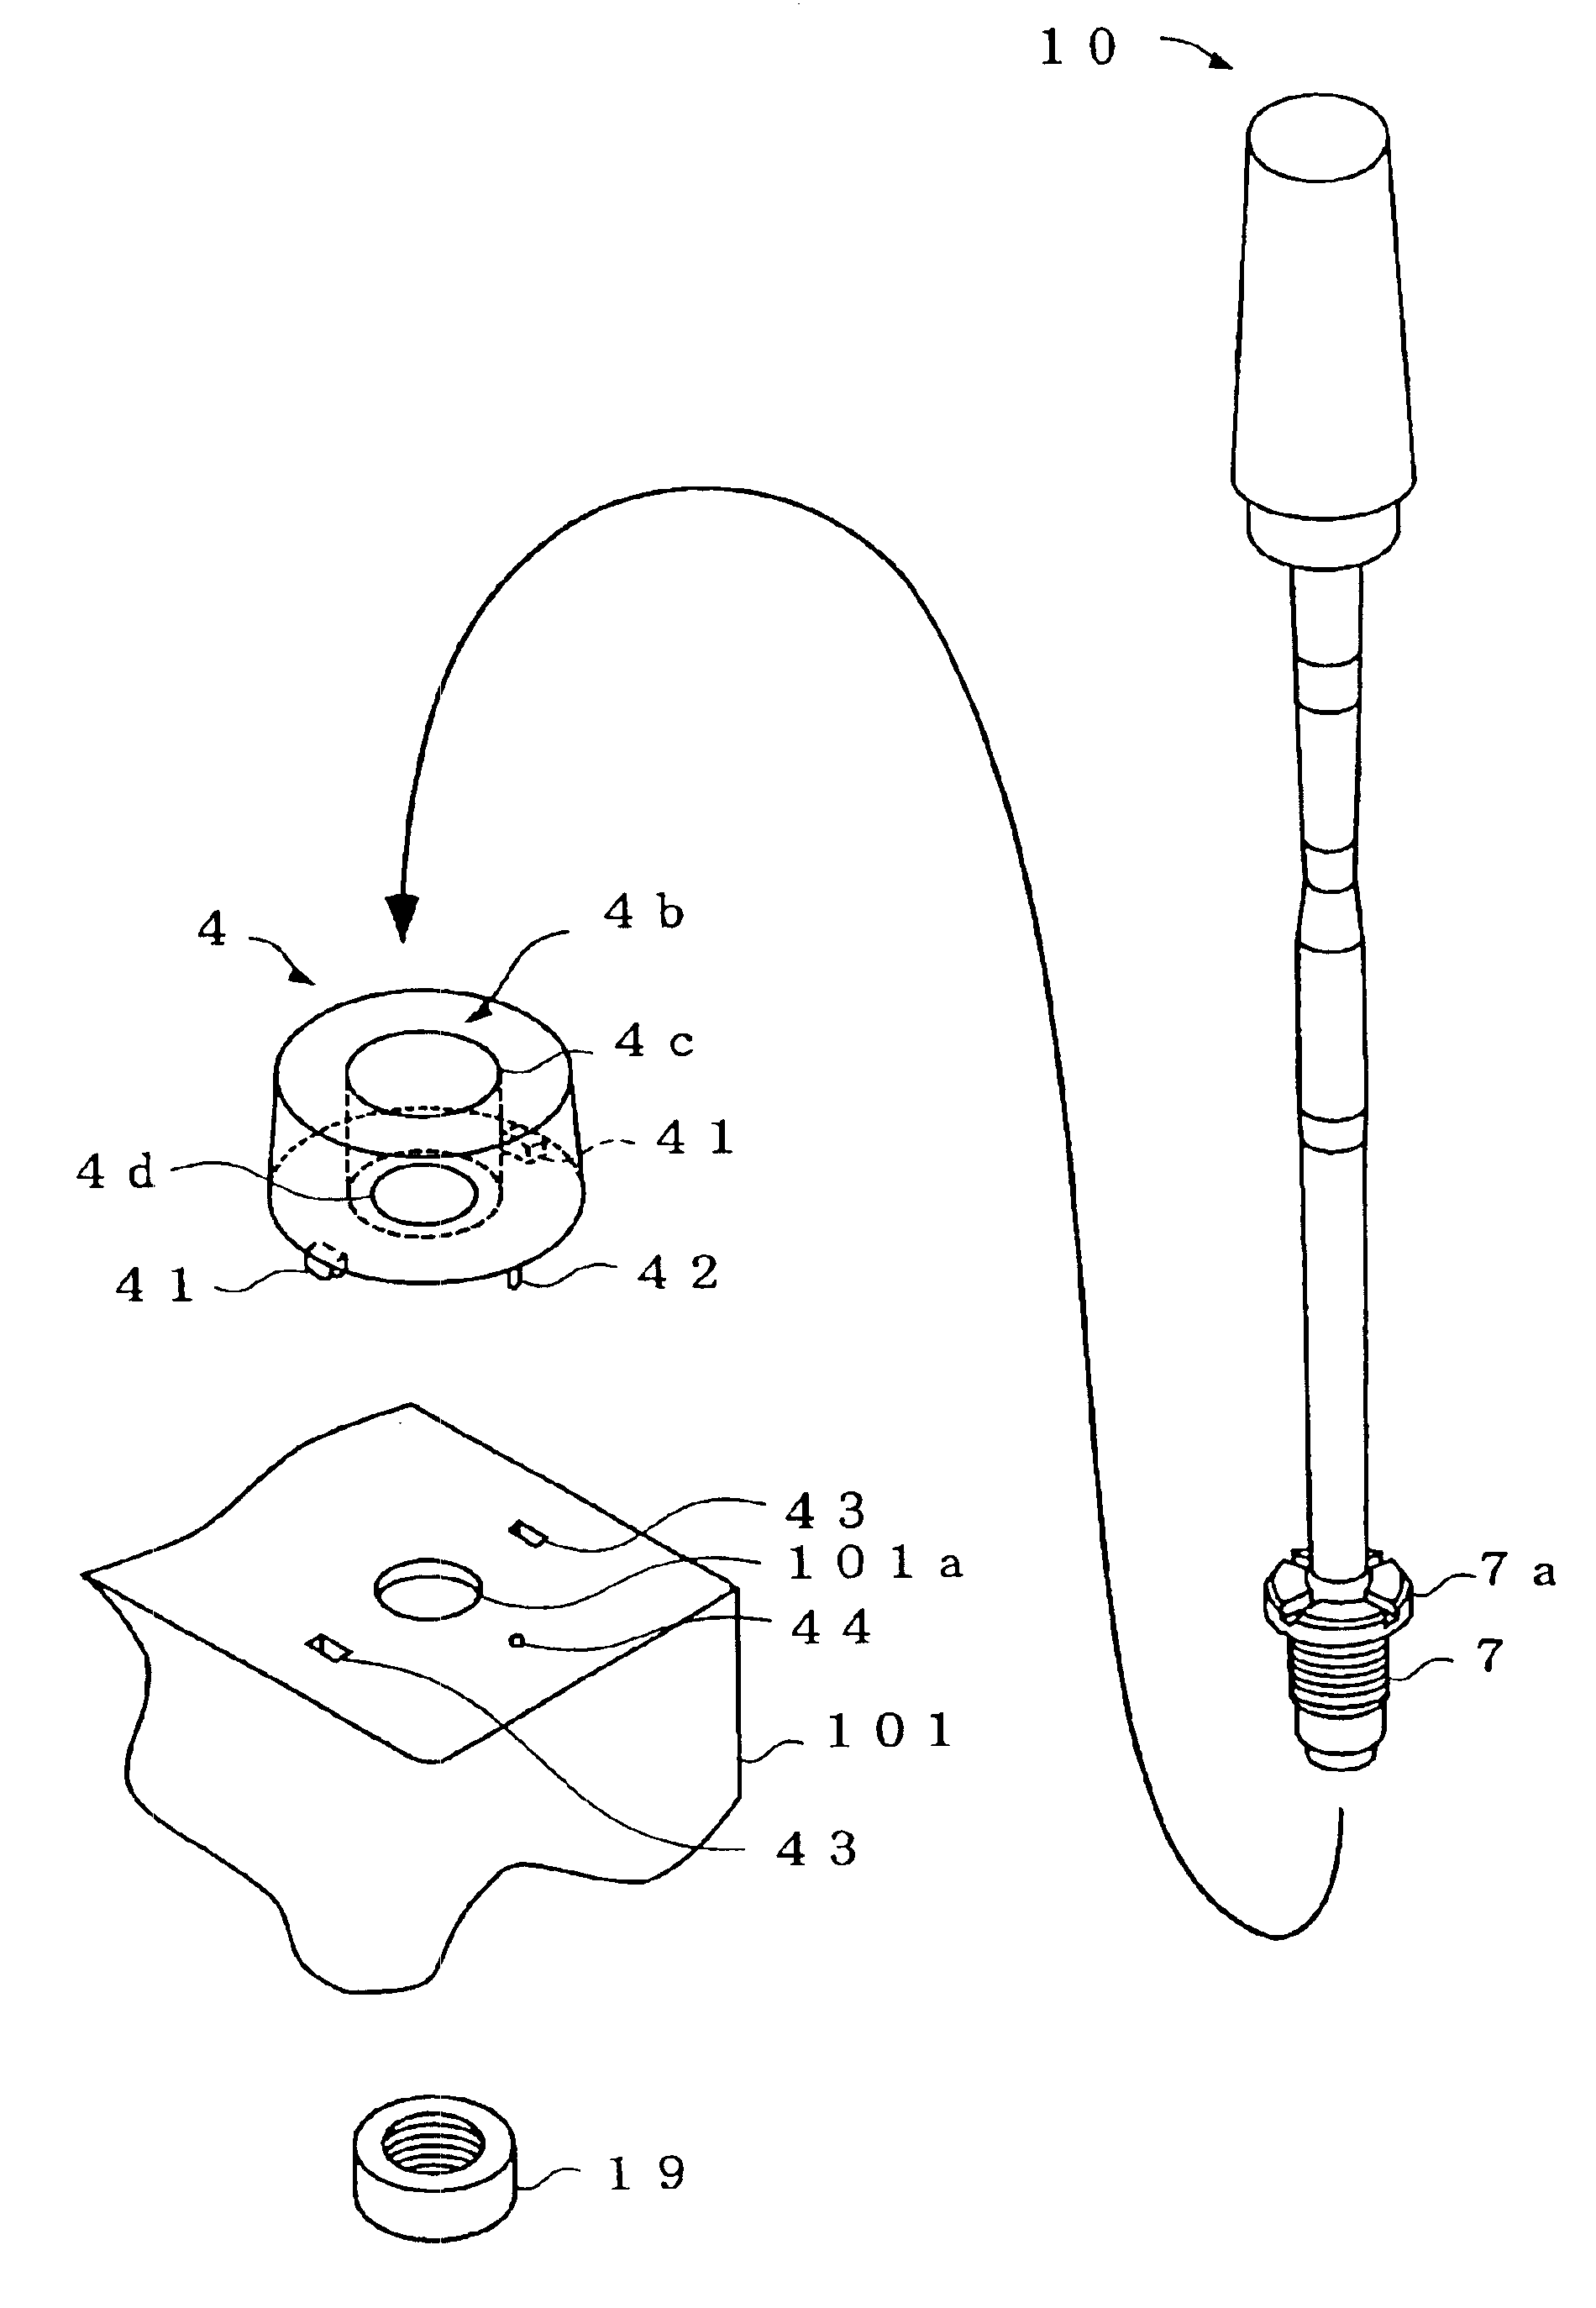 Multi-frequency antenna